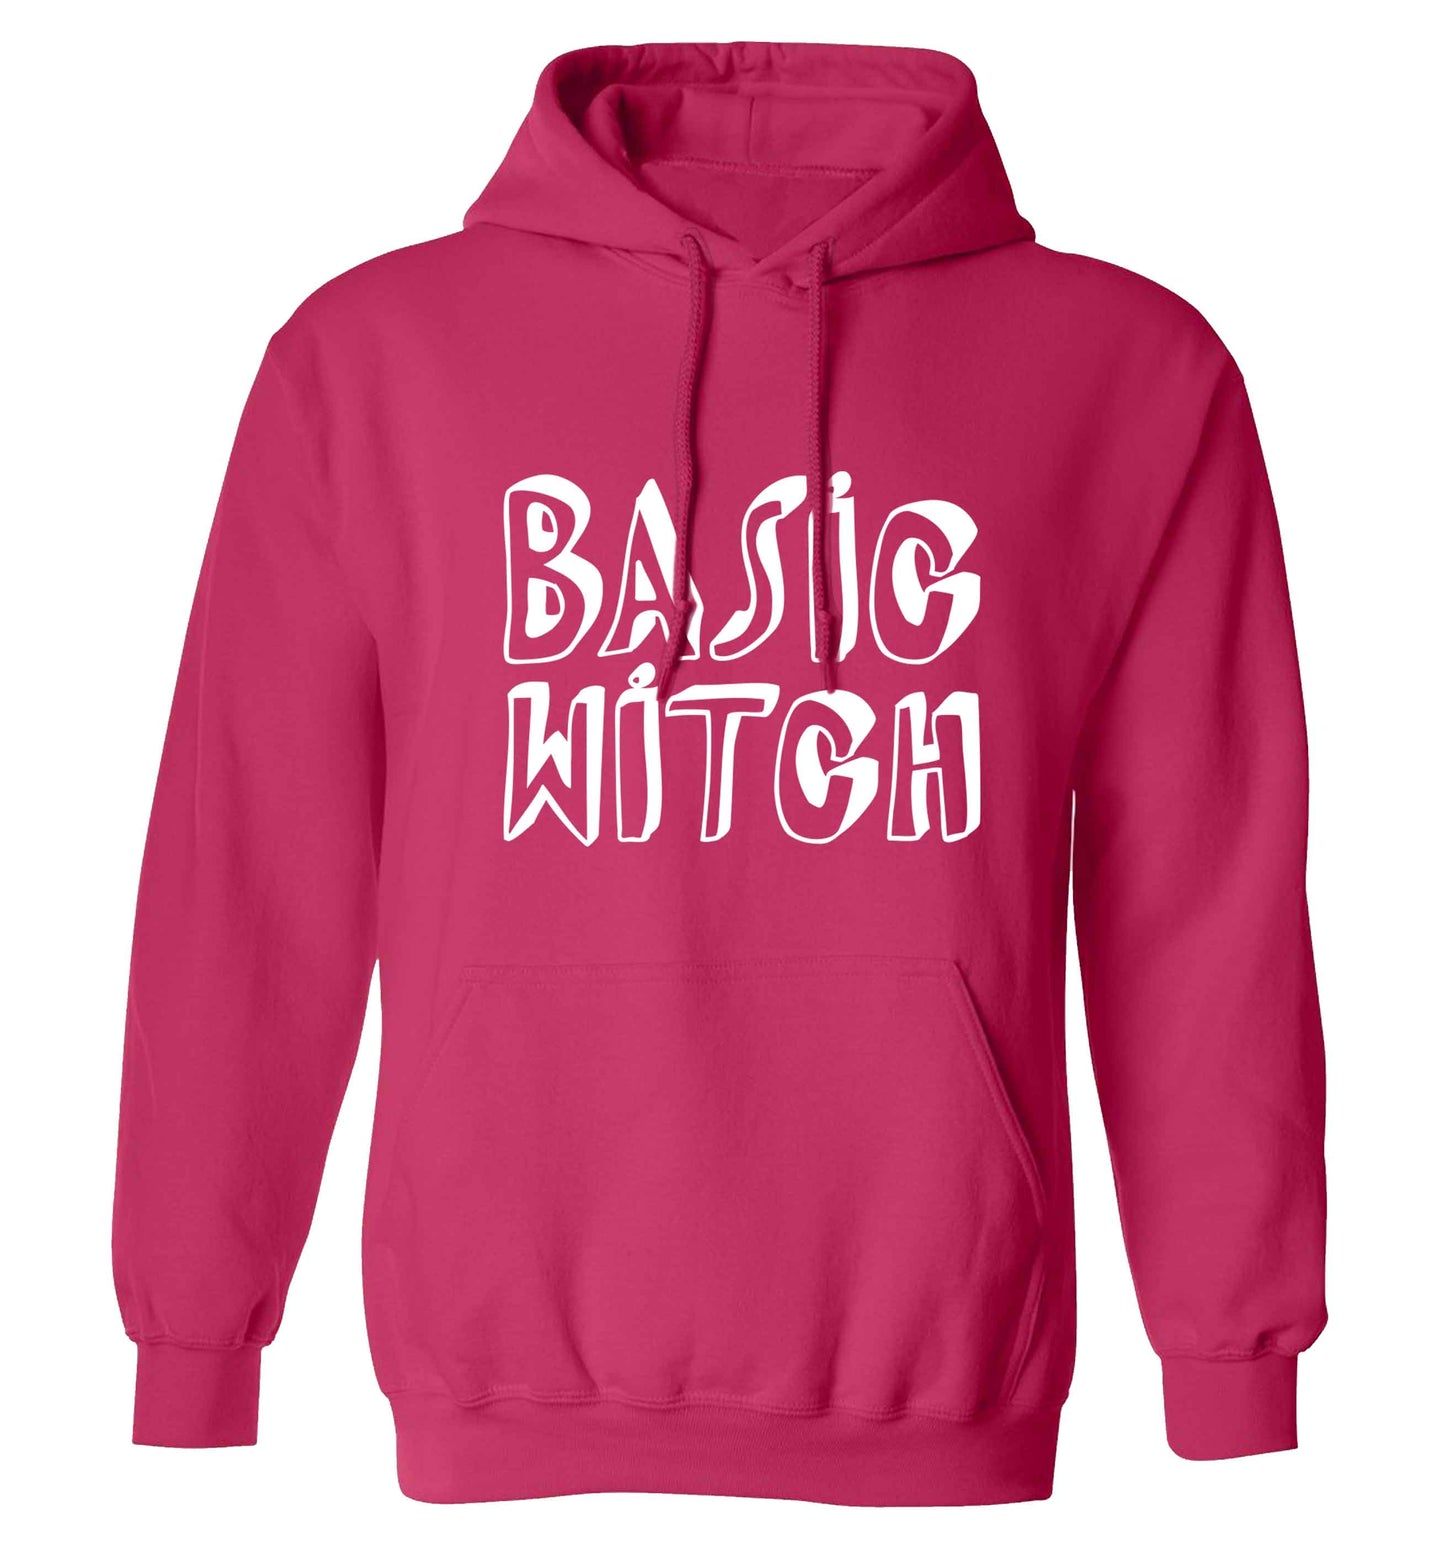 Basic witch adults unisex pink hoodie 2XL